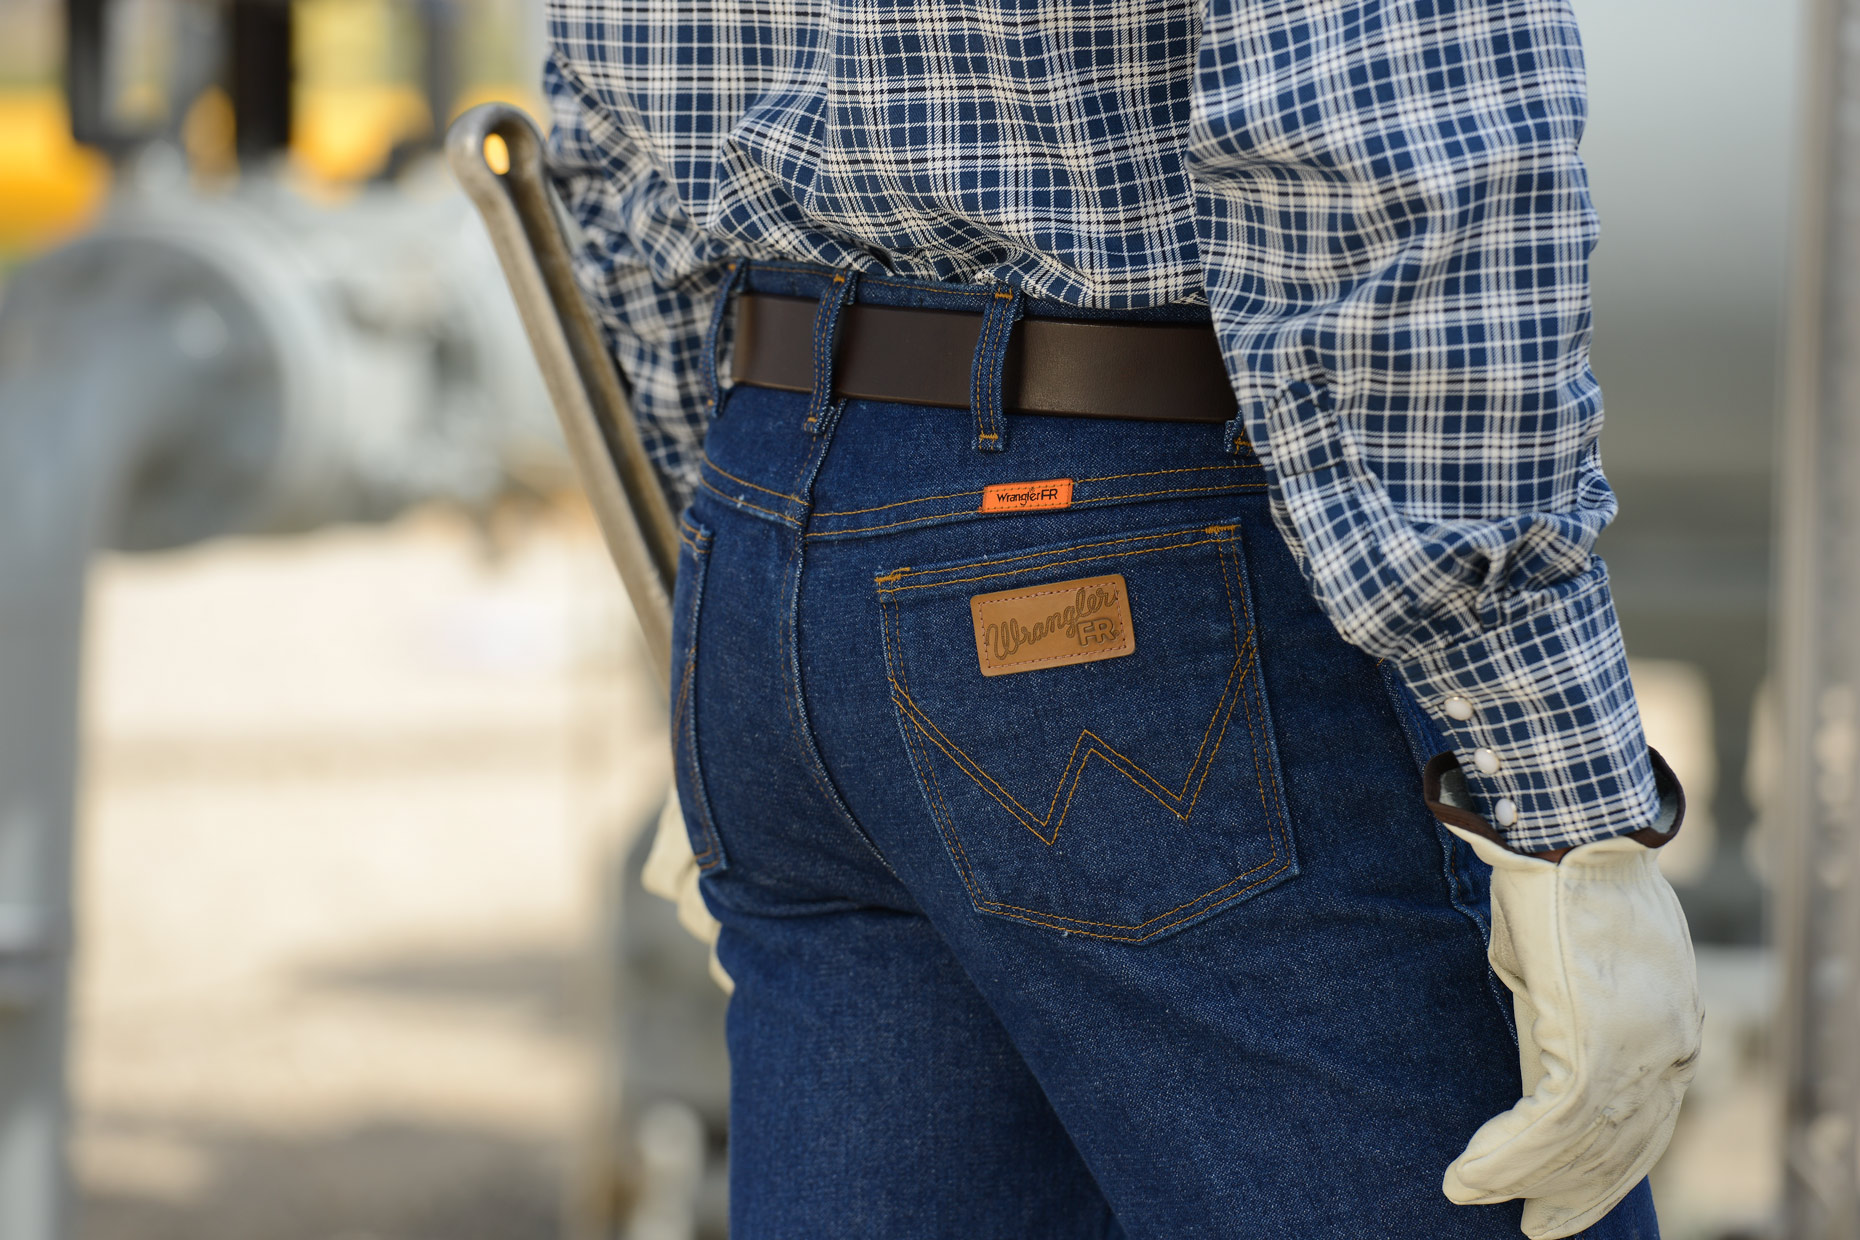 Fashion photography for Wrangler by Dallas photographer Kevin Brown